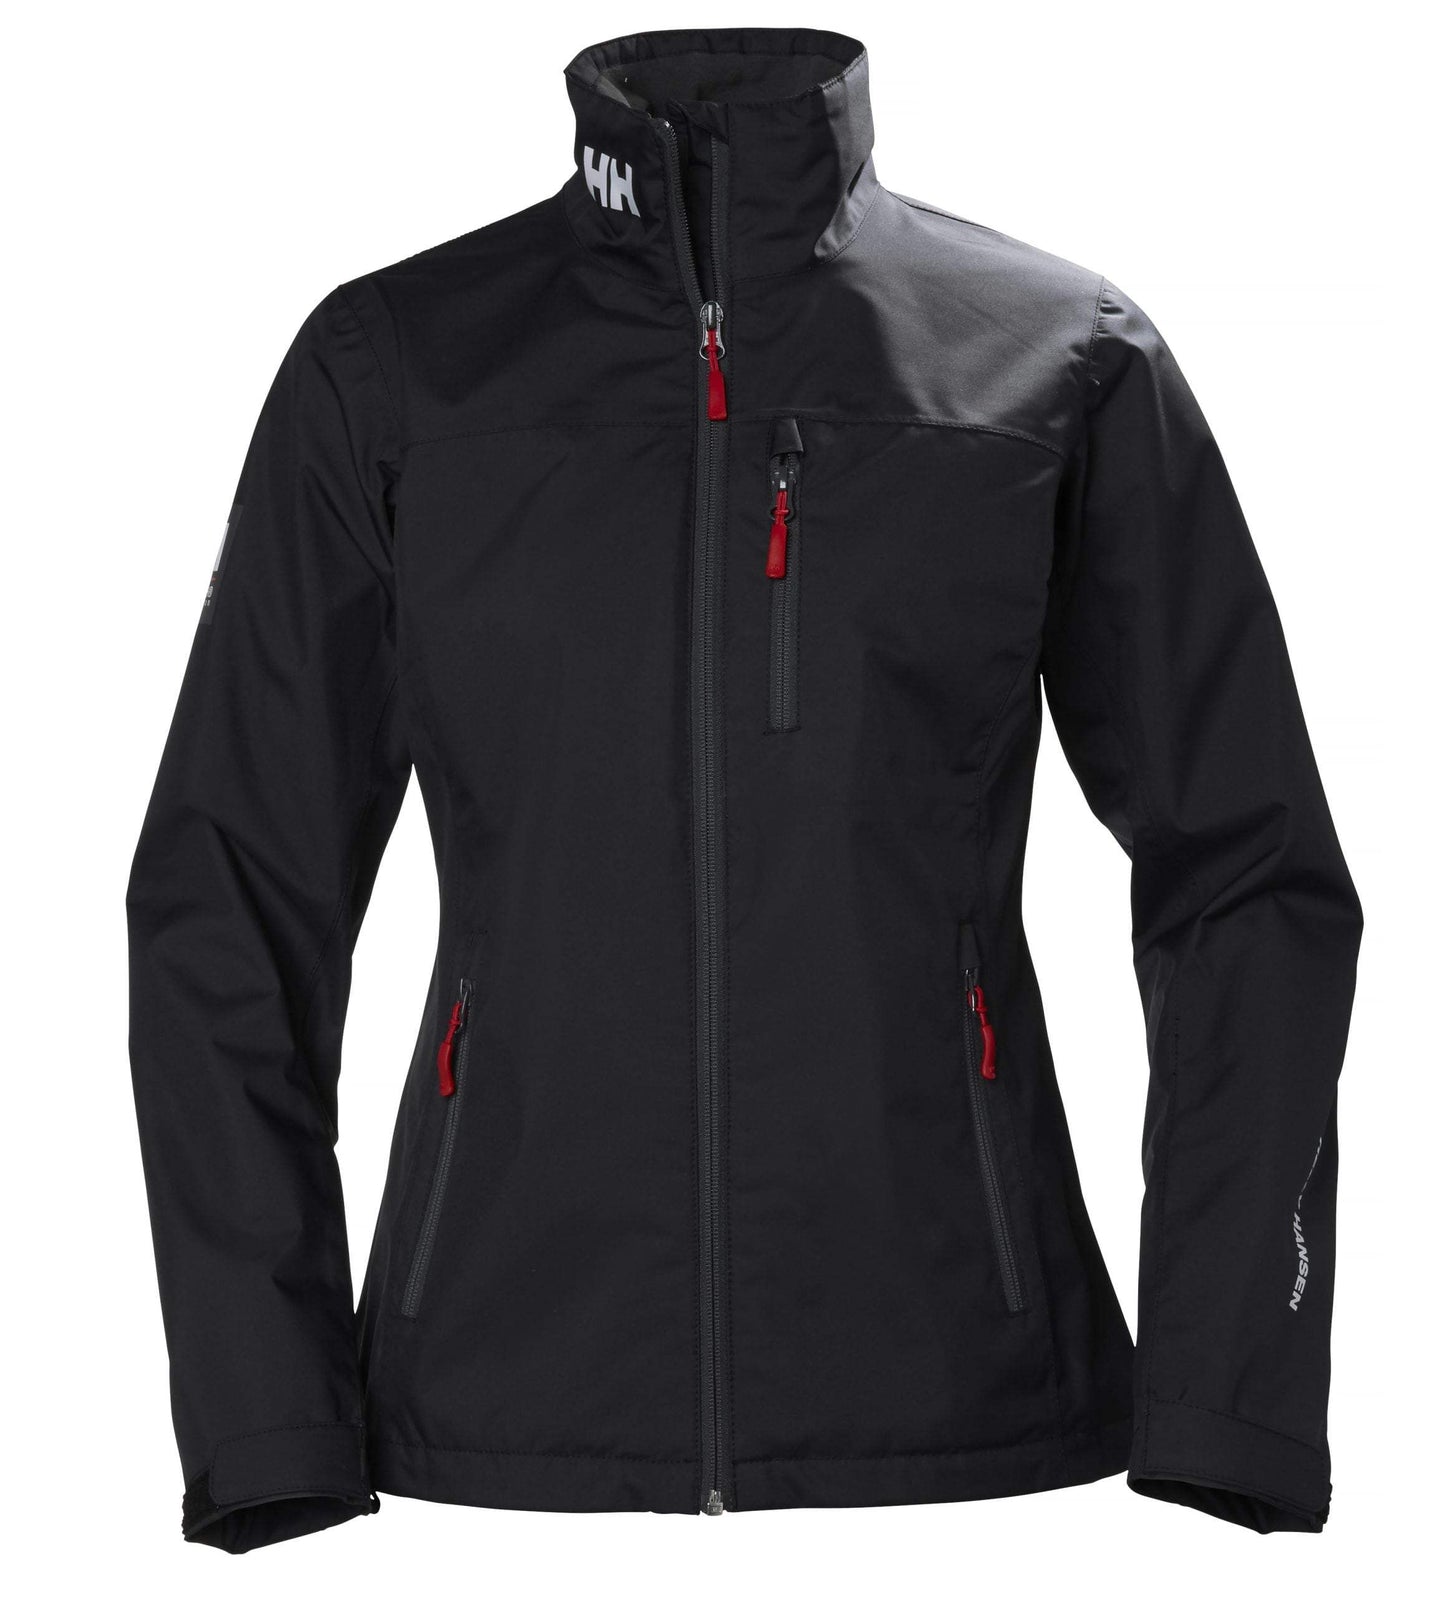 Women's Crew Midlayer Jacket by Helly Hansen - The Luxury Promotional Gifts Company Limited